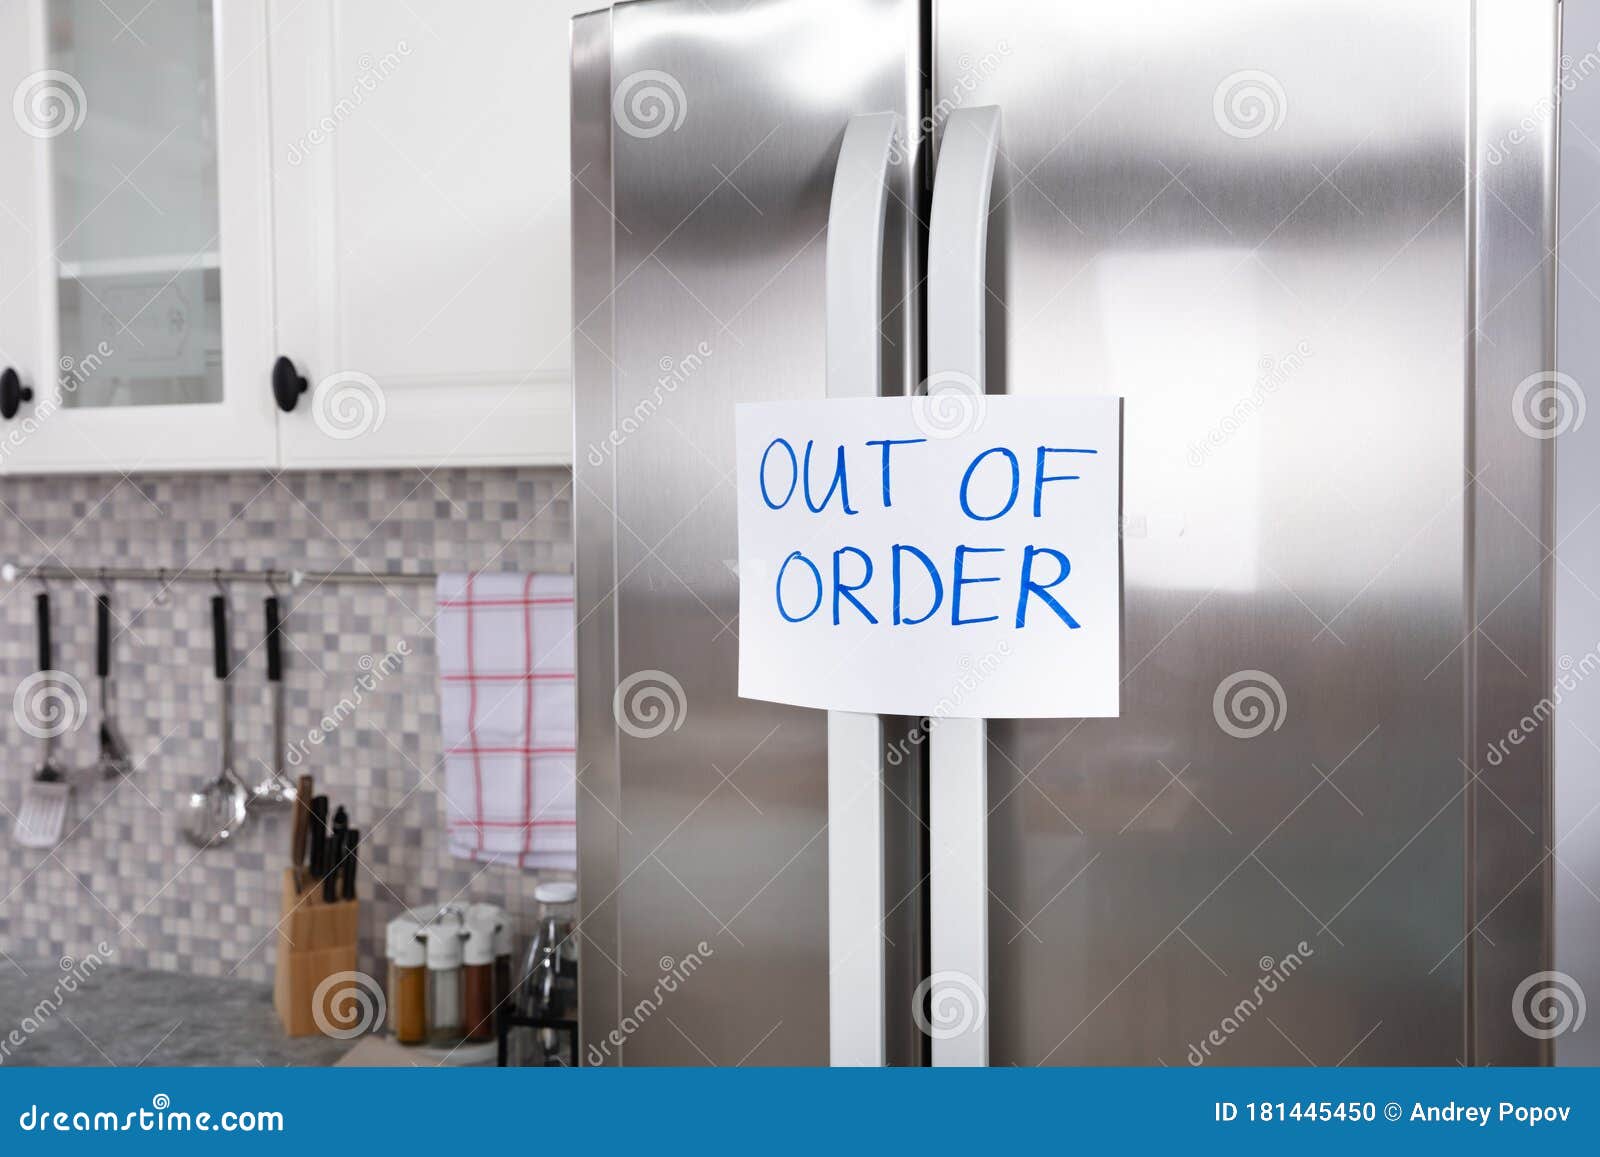 out of order text stuck on refrigerator